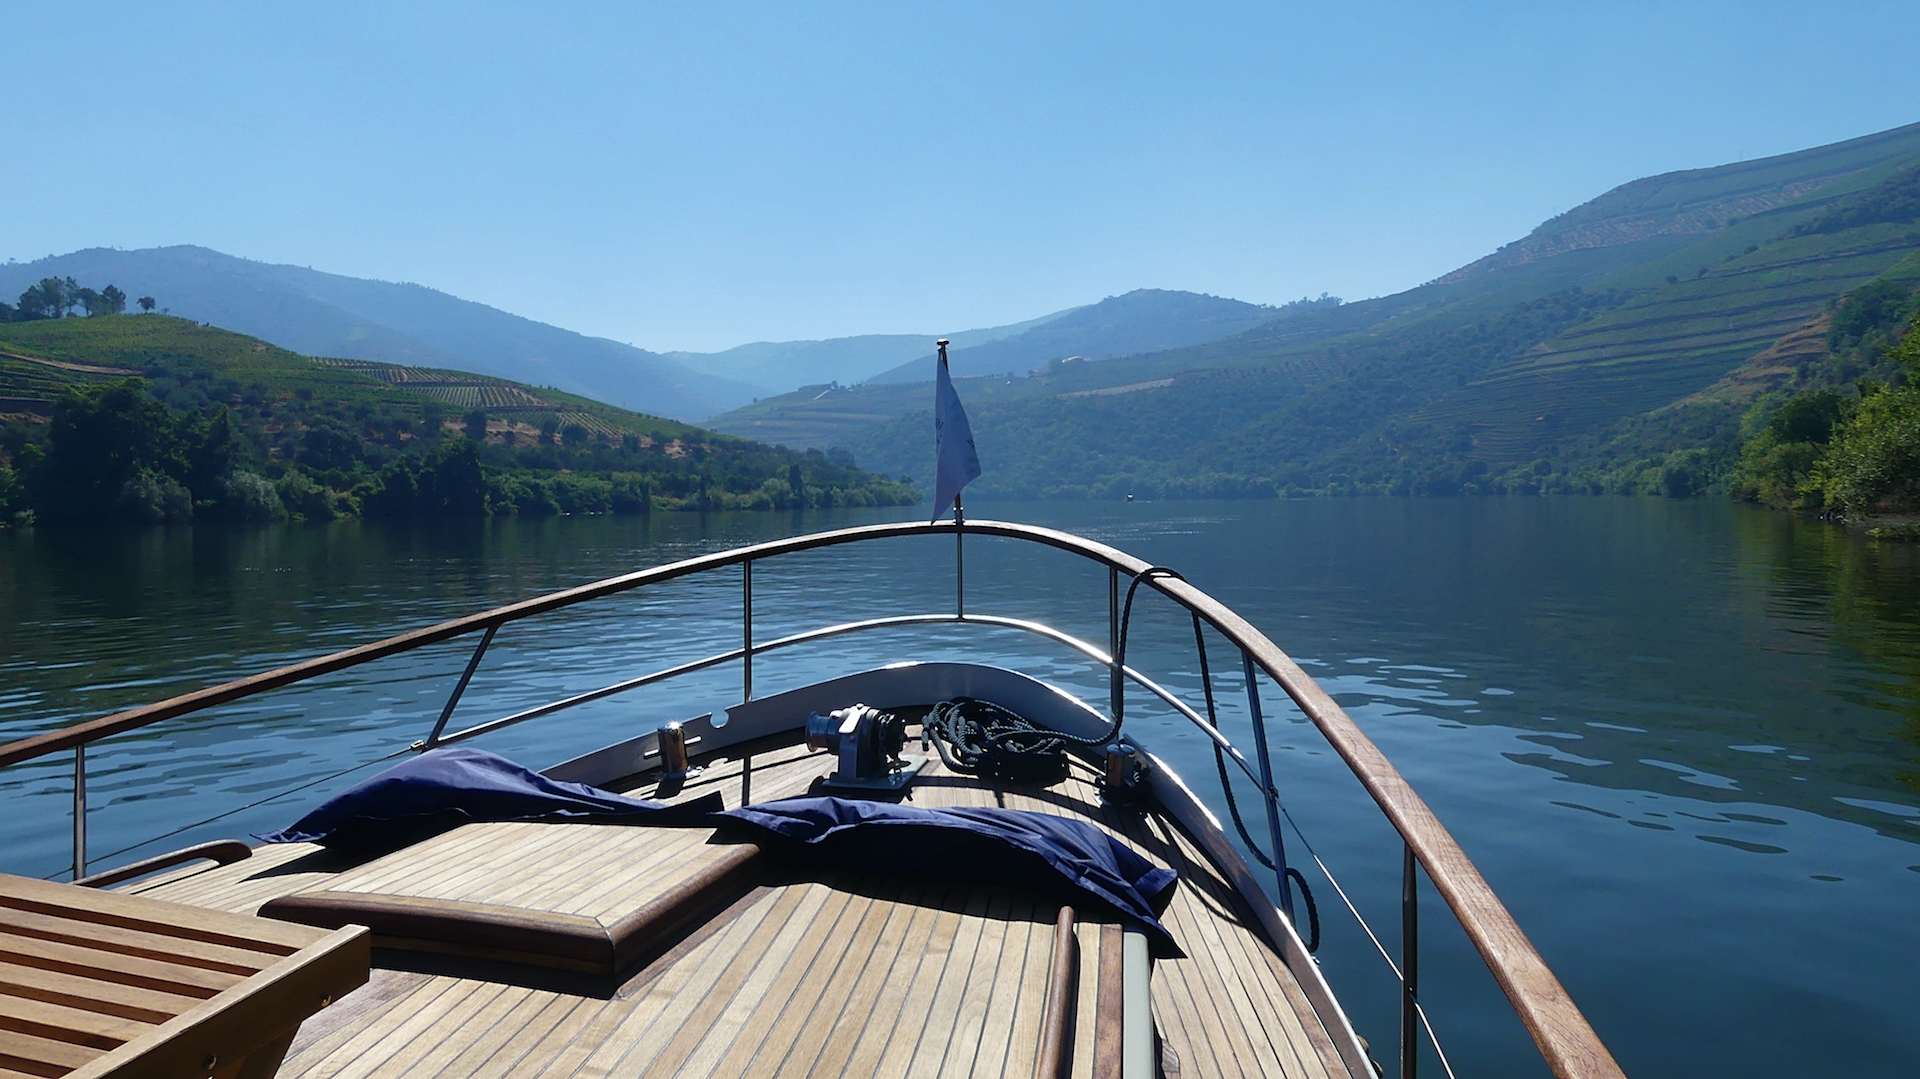 Enjoy the views from your boats in the Douro